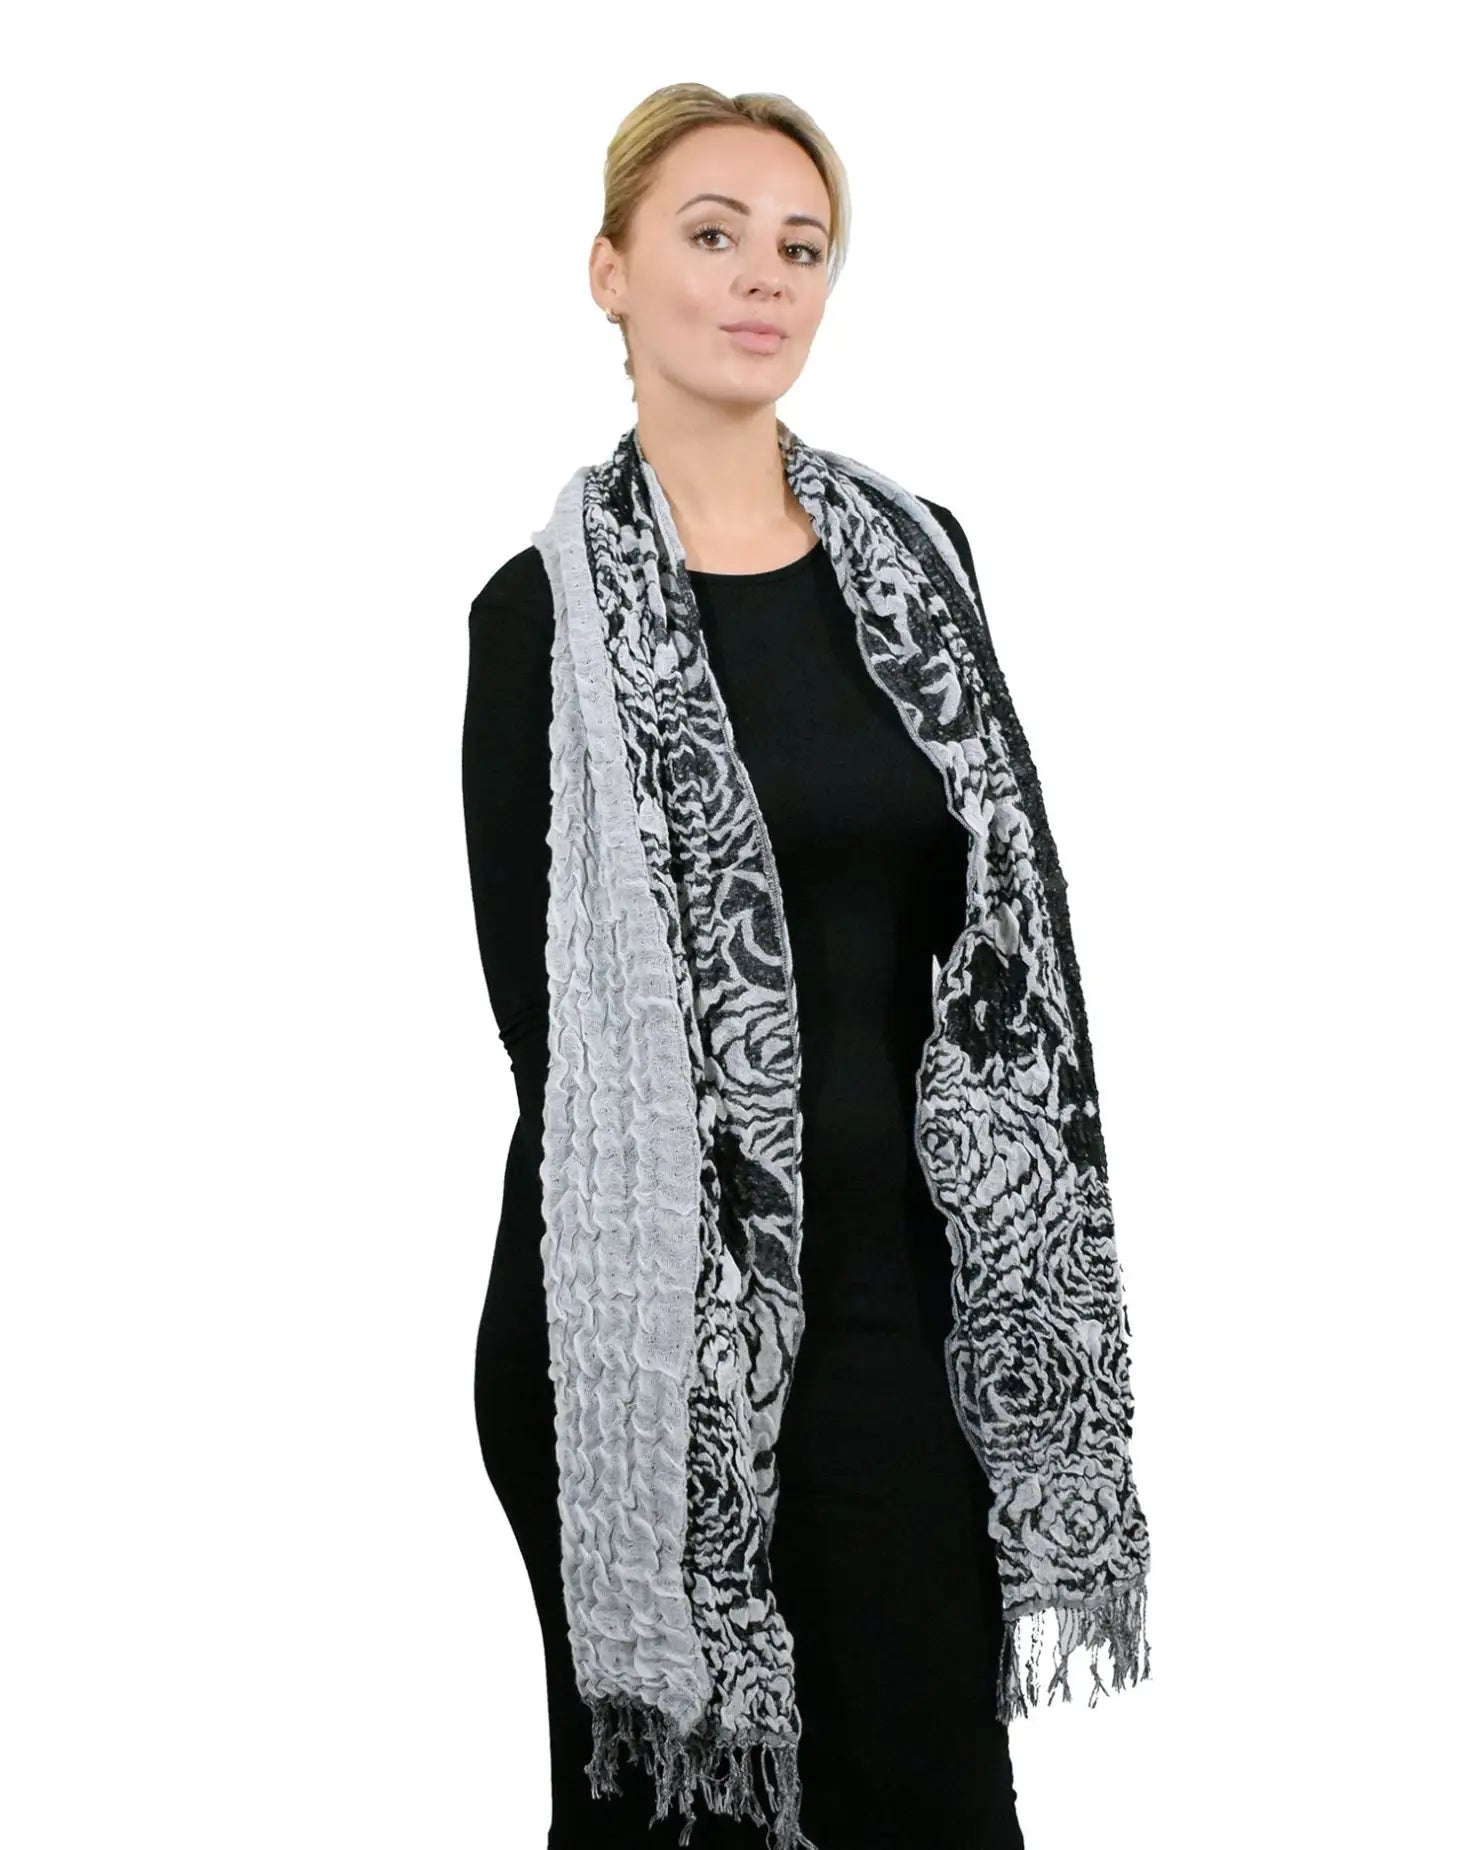 Woman wearing black and white scarf from Two Tone Textured Bubble Look Scarf.